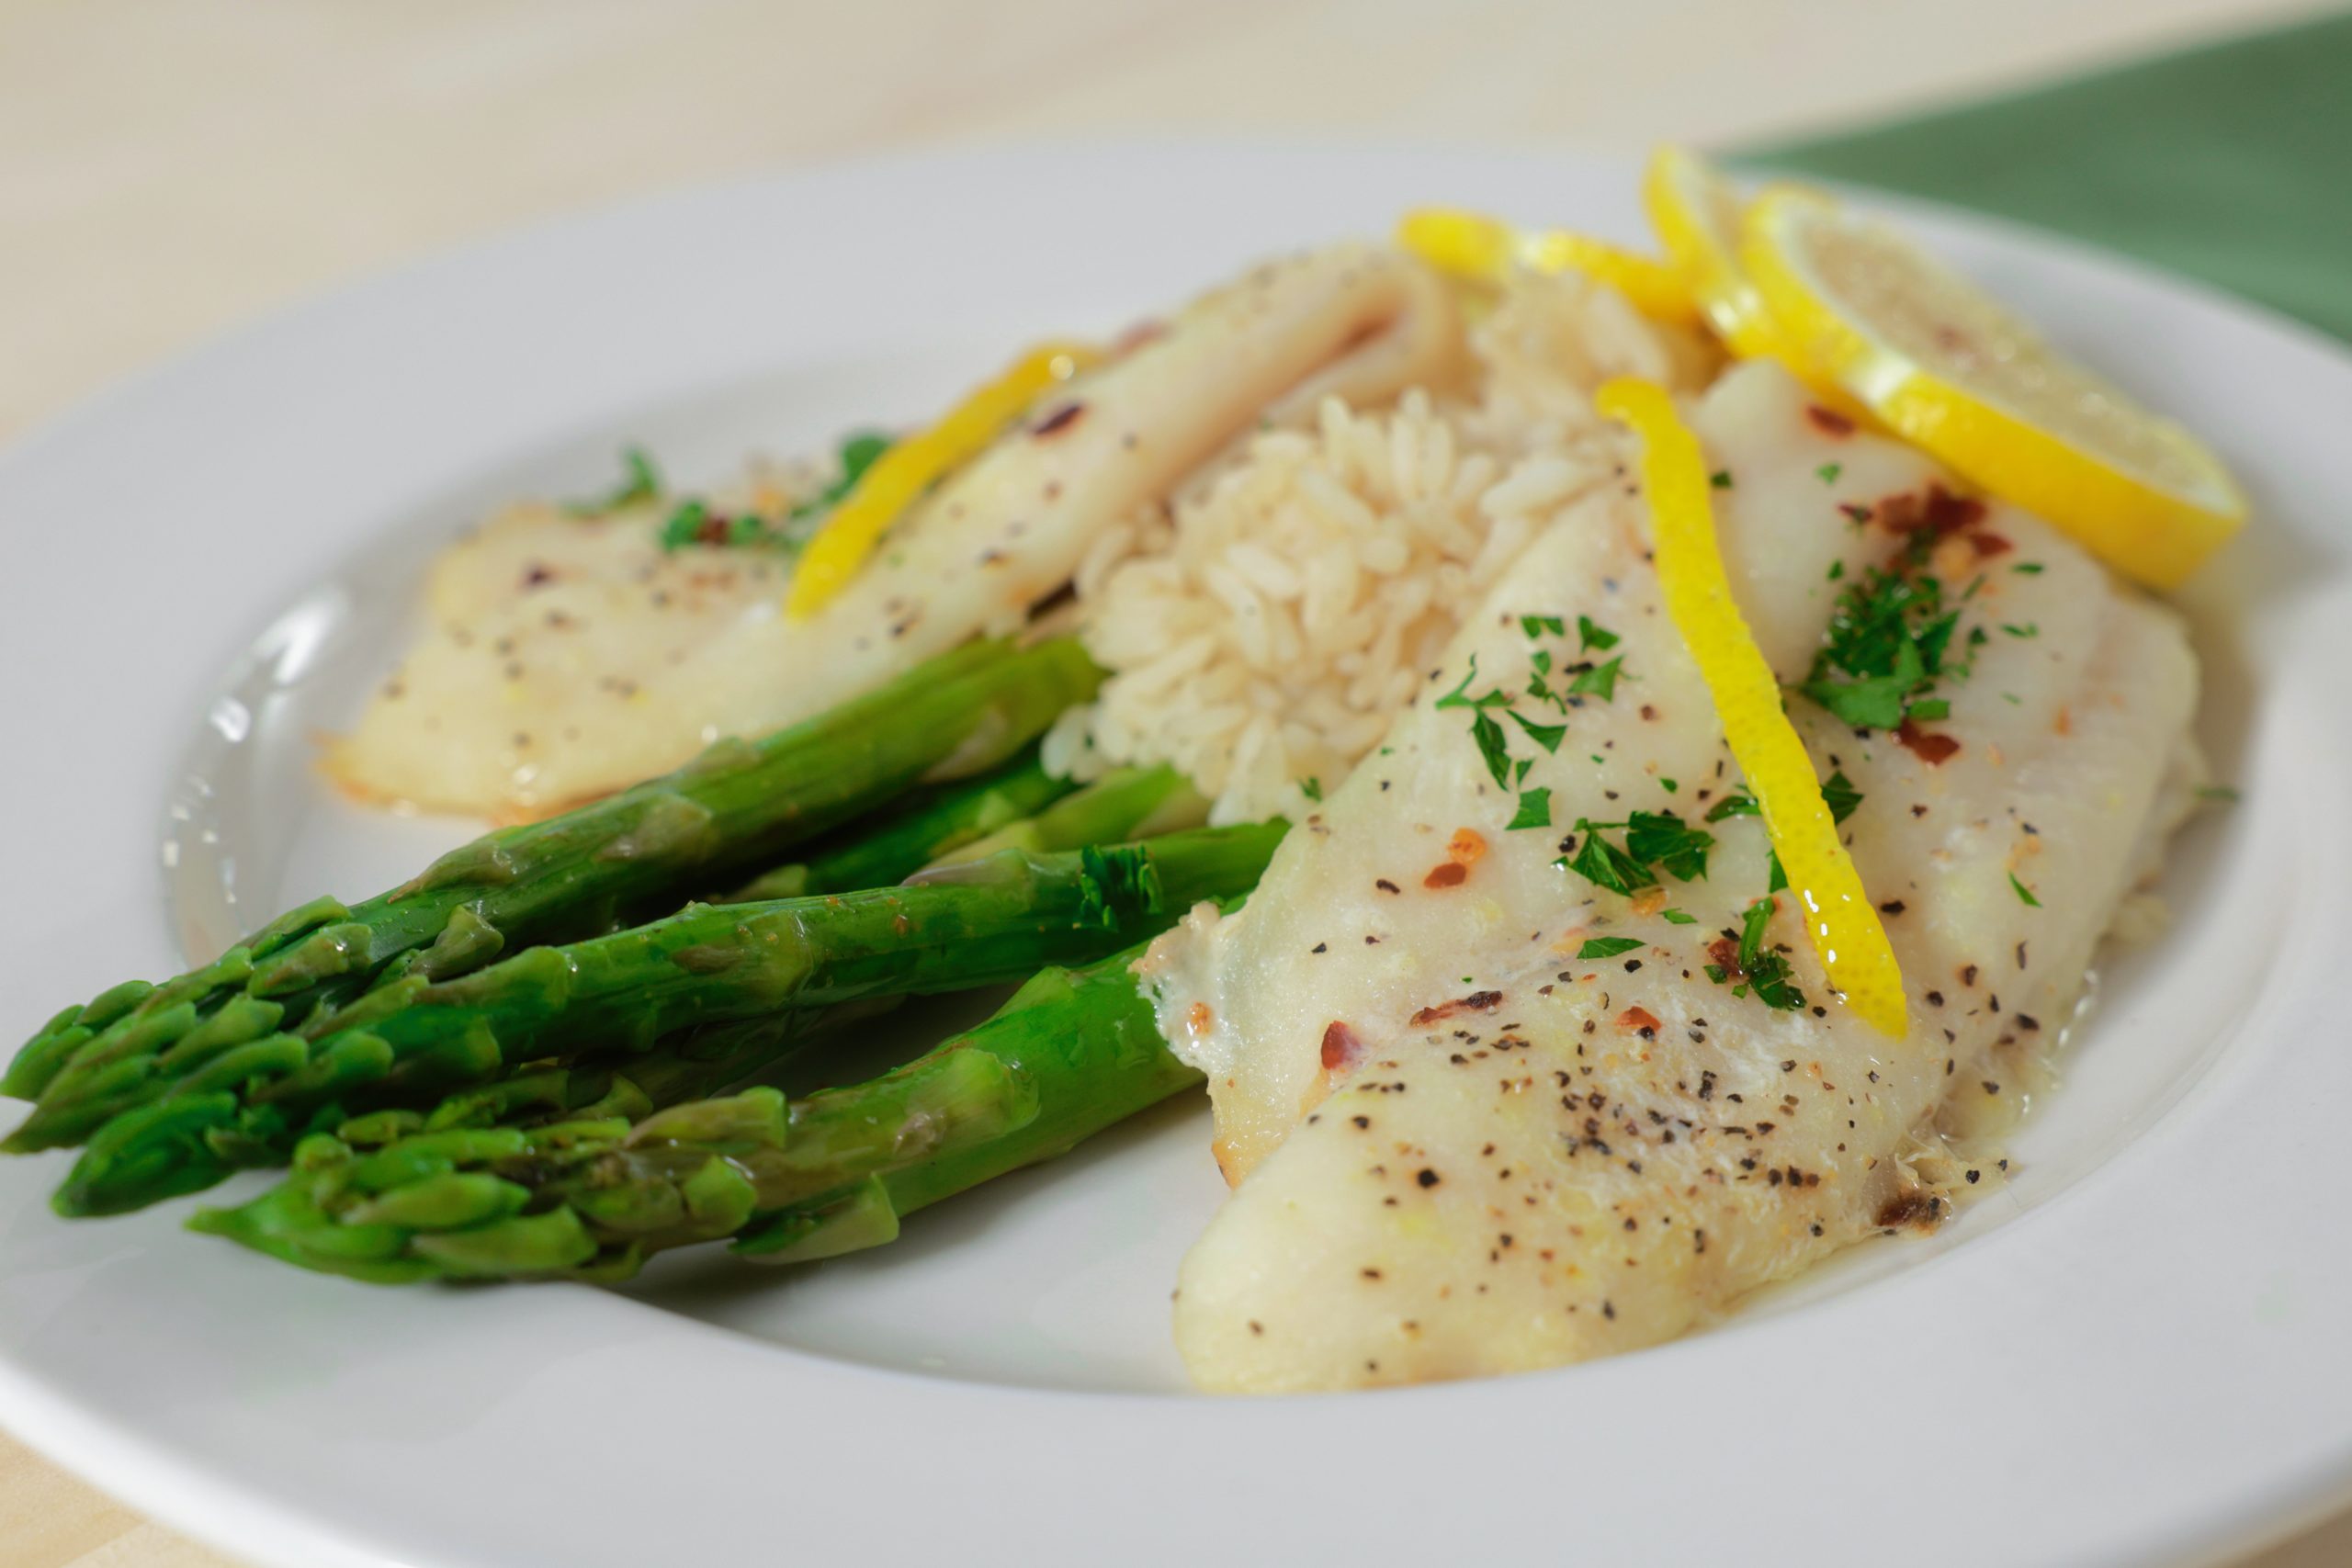 Fish, rice, and asparagus